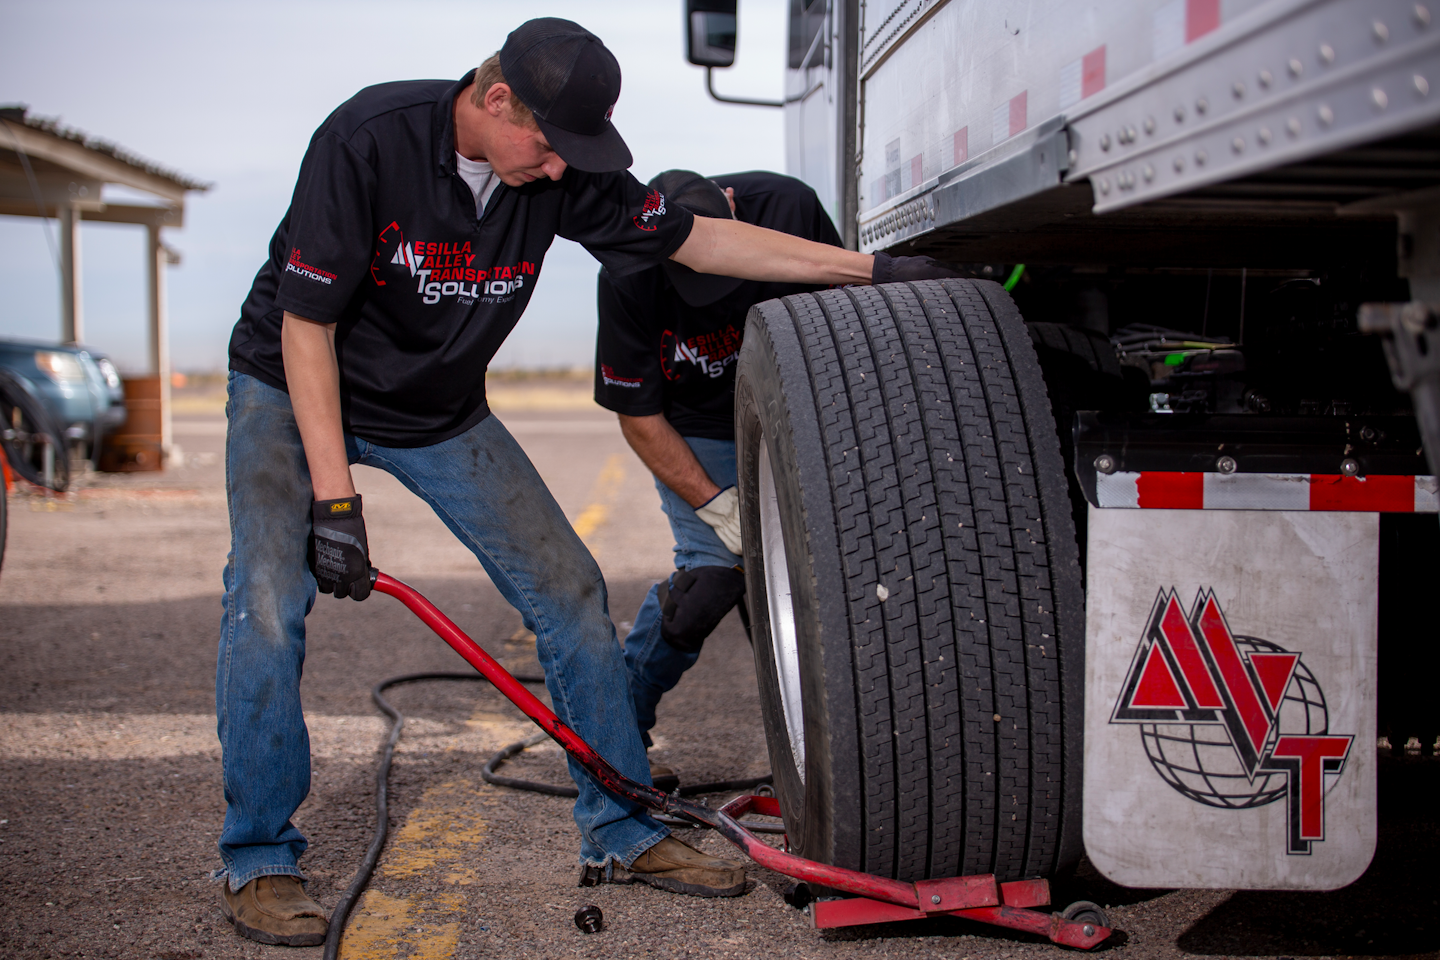 MVT Solutions workers swap out tires during testing. The company has an established system based on the racing industry to validate which LRR tires will provide a fleet the best ROI.